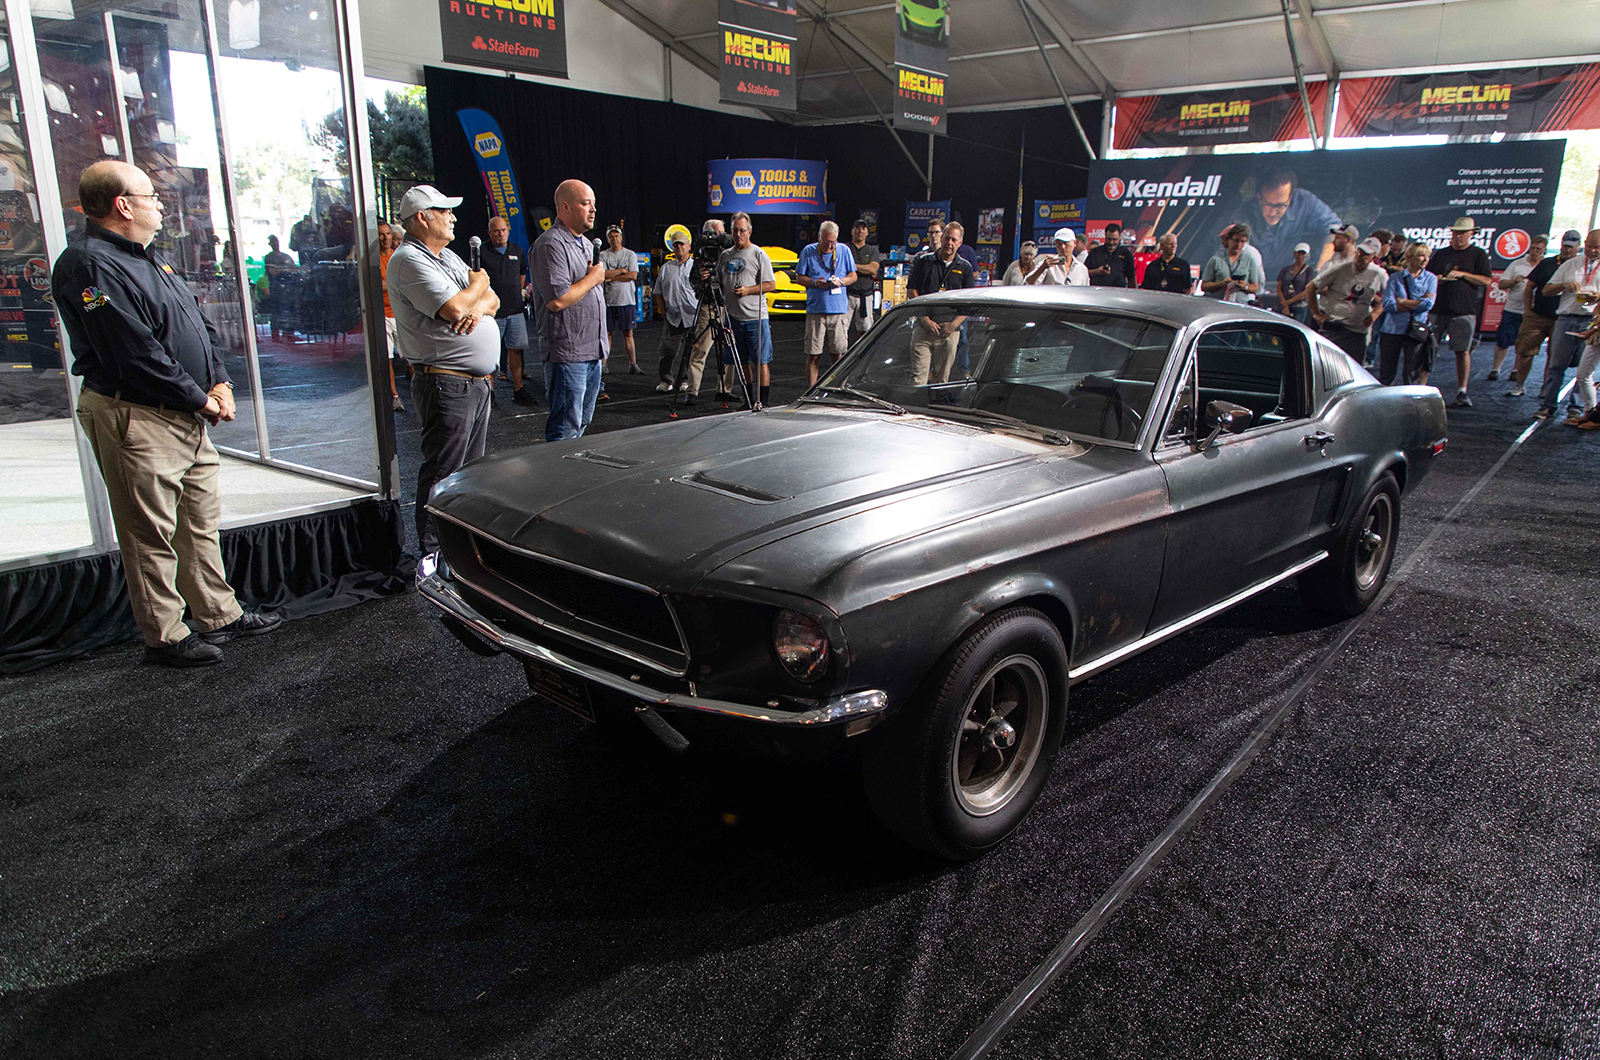 It’s an icon of the silver screen – but what will the Mustang sell for?